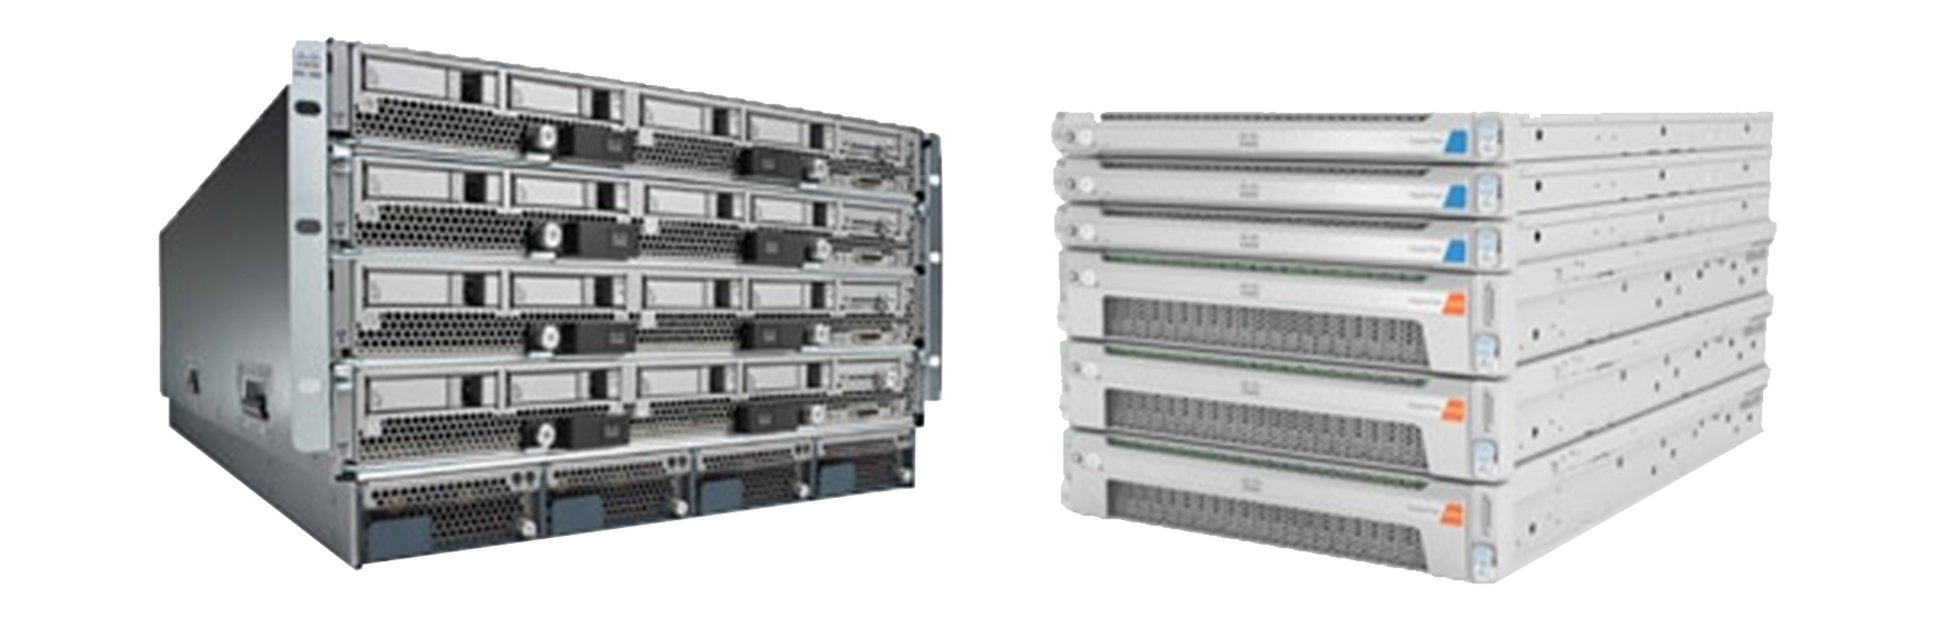 Cisco HyperFlex systems with compute-only nodes